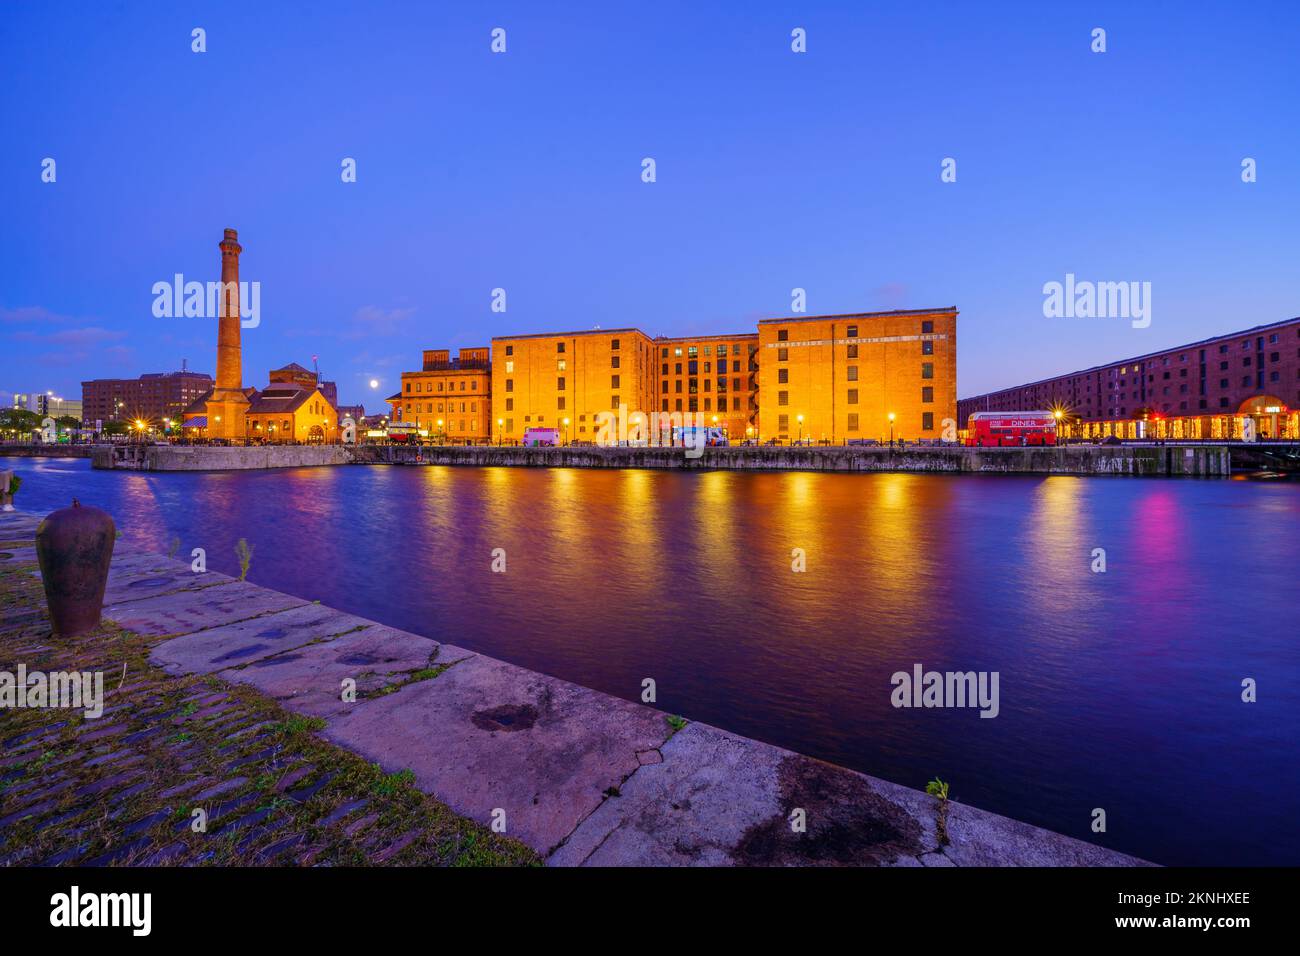 Liverpool, UK - October 07, 2022: Evening view of the Royal Albert Dock, with the moon, in Liverpool, Merseyside, England, UK Stock Photo